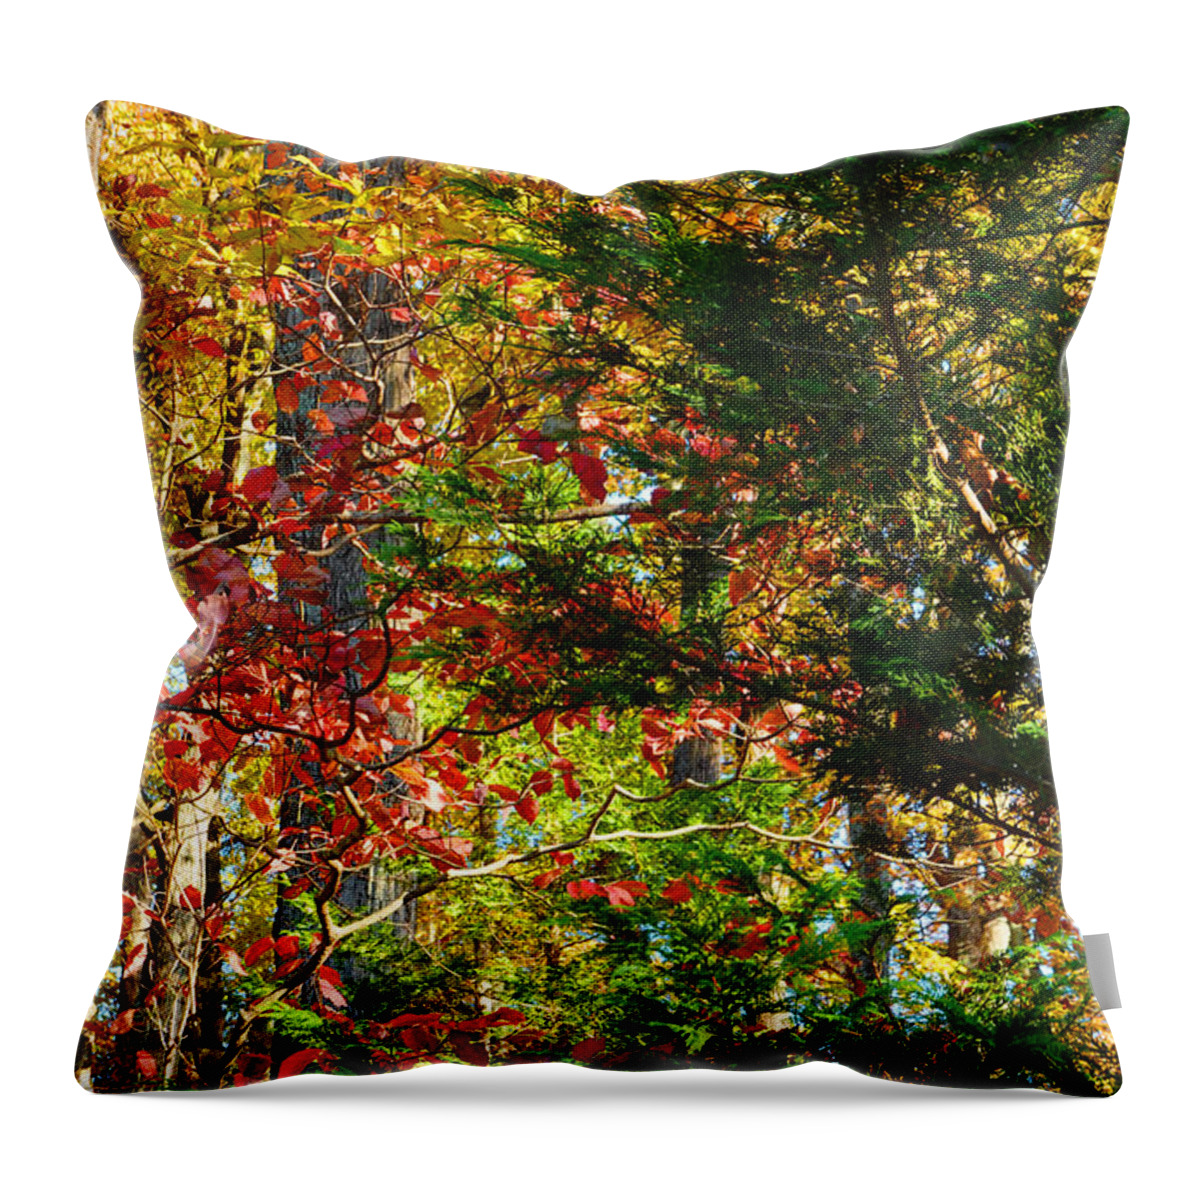 Colorful Throw Pillow featuring the photograph It's So Easy Being Green - A Piedmont Autumn Impression by Steve Ember